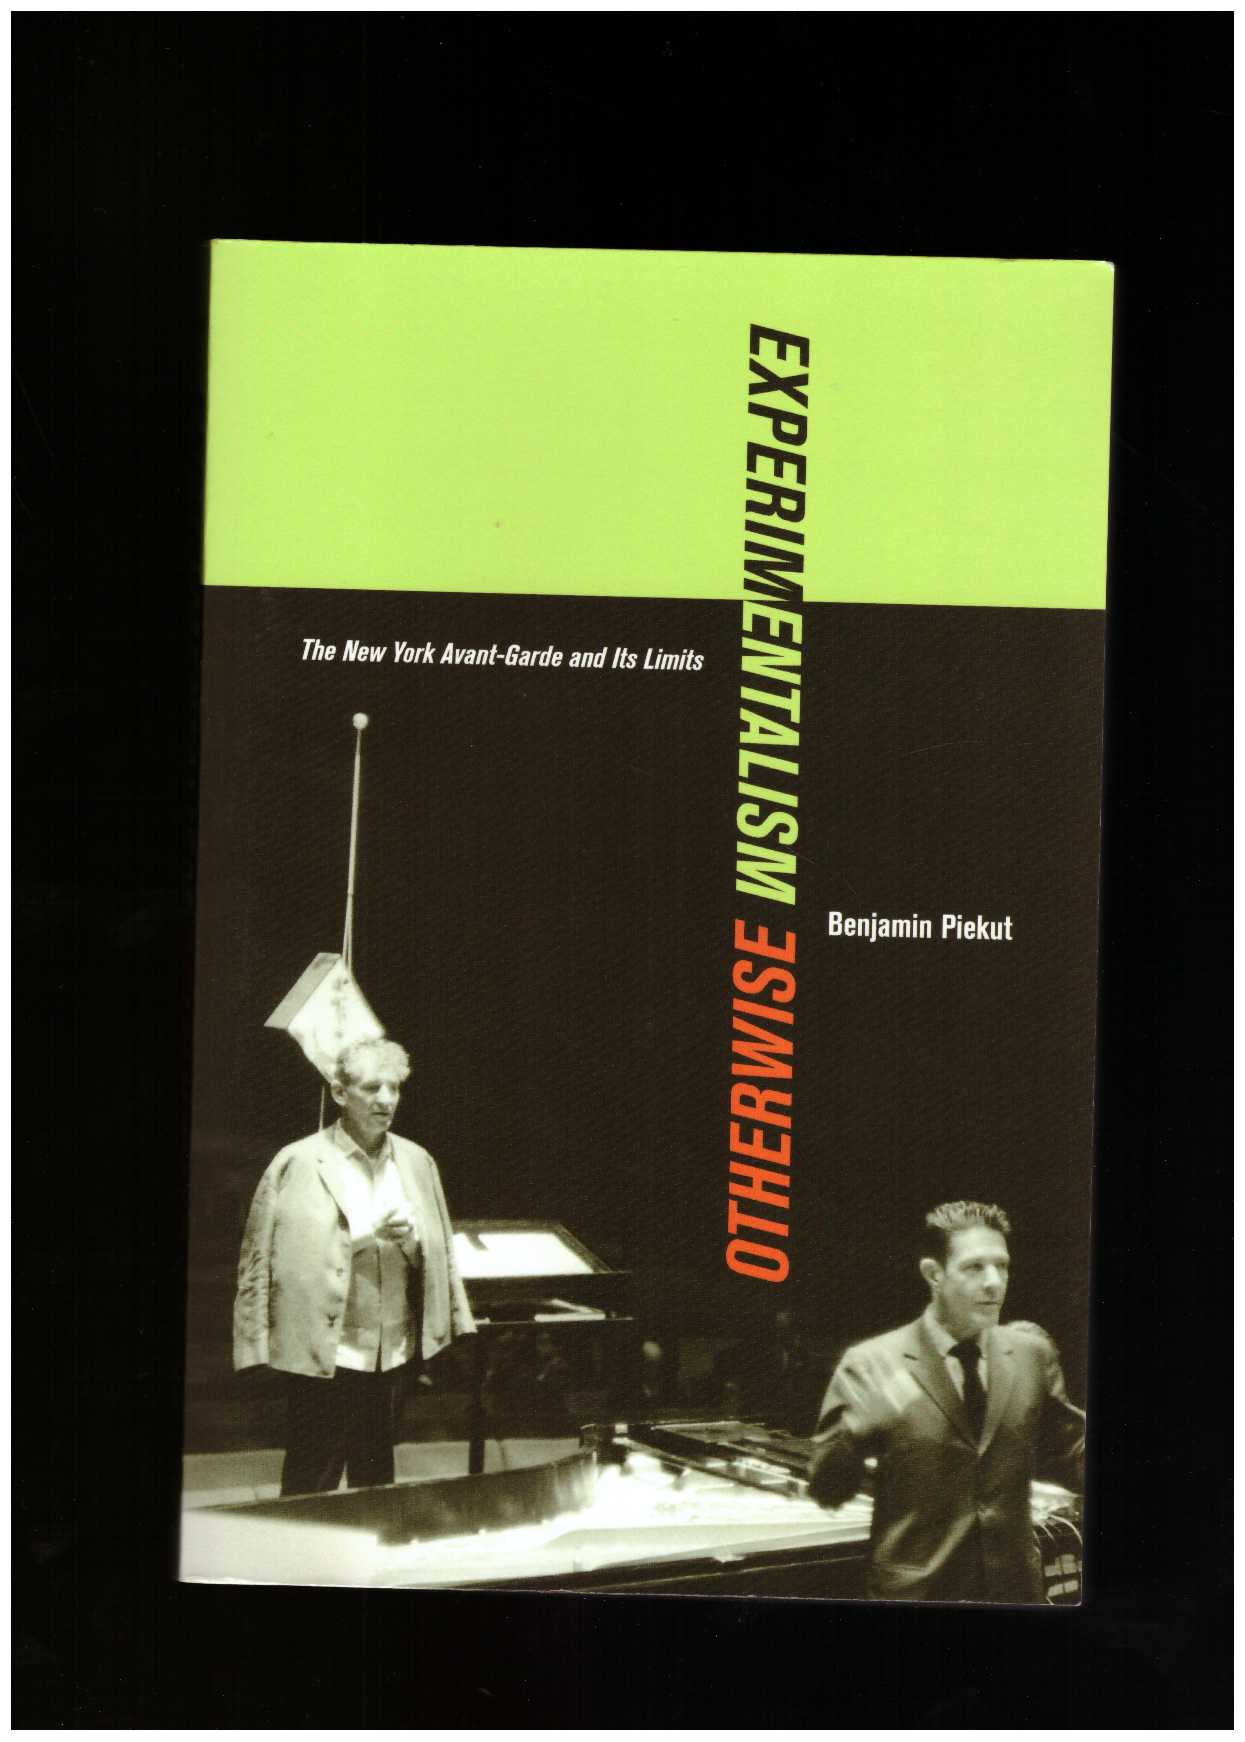 PIEKUT, Benjamin - Experimentalism Otherwise: The New York Avant-Garde and Its Limits